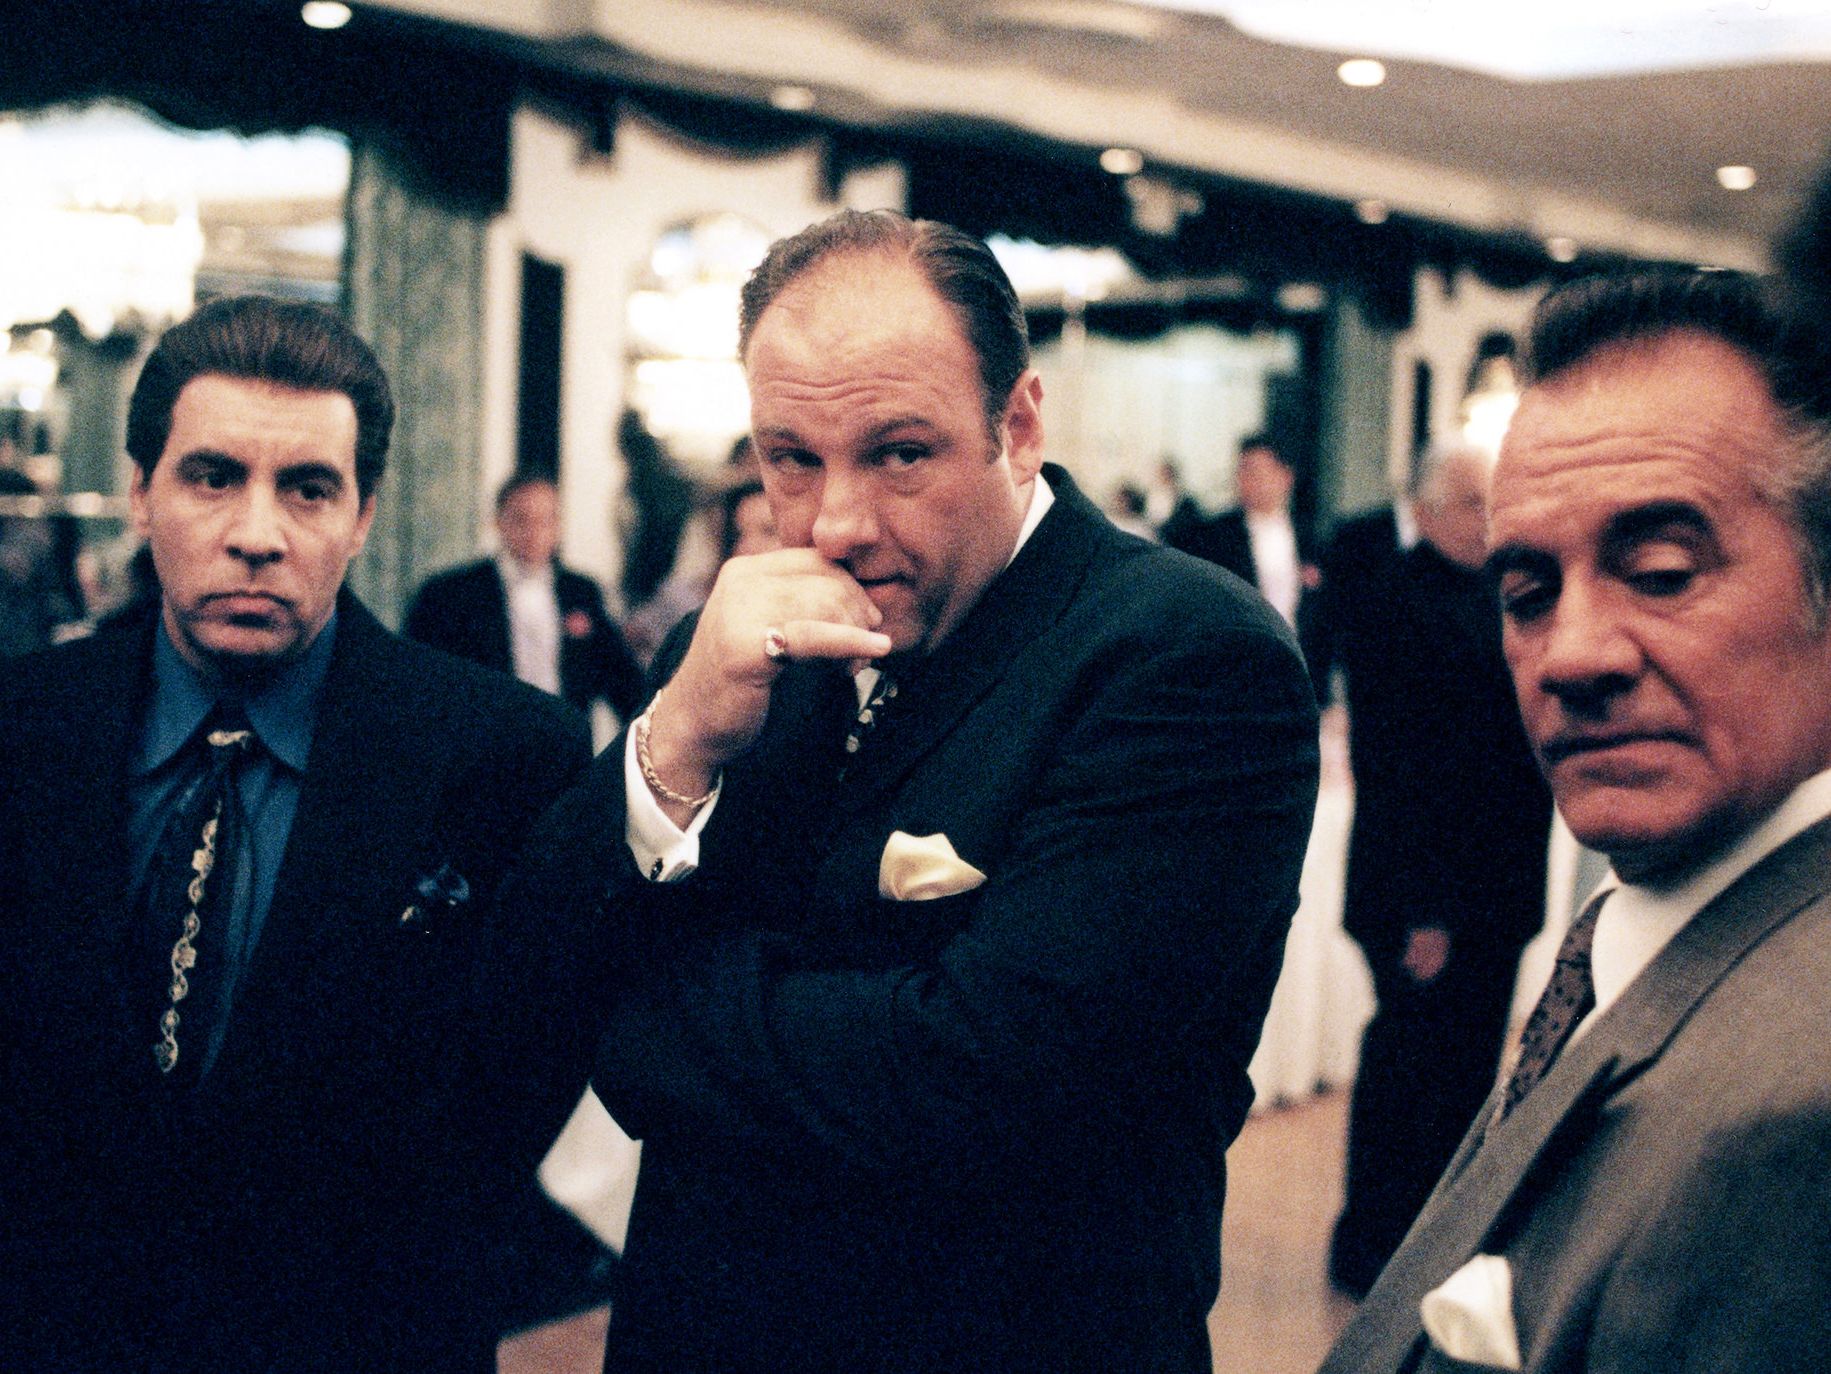 10+ 'Sopranos' Behind-The-Scenes Secrets Fans Didn't Know - Diply